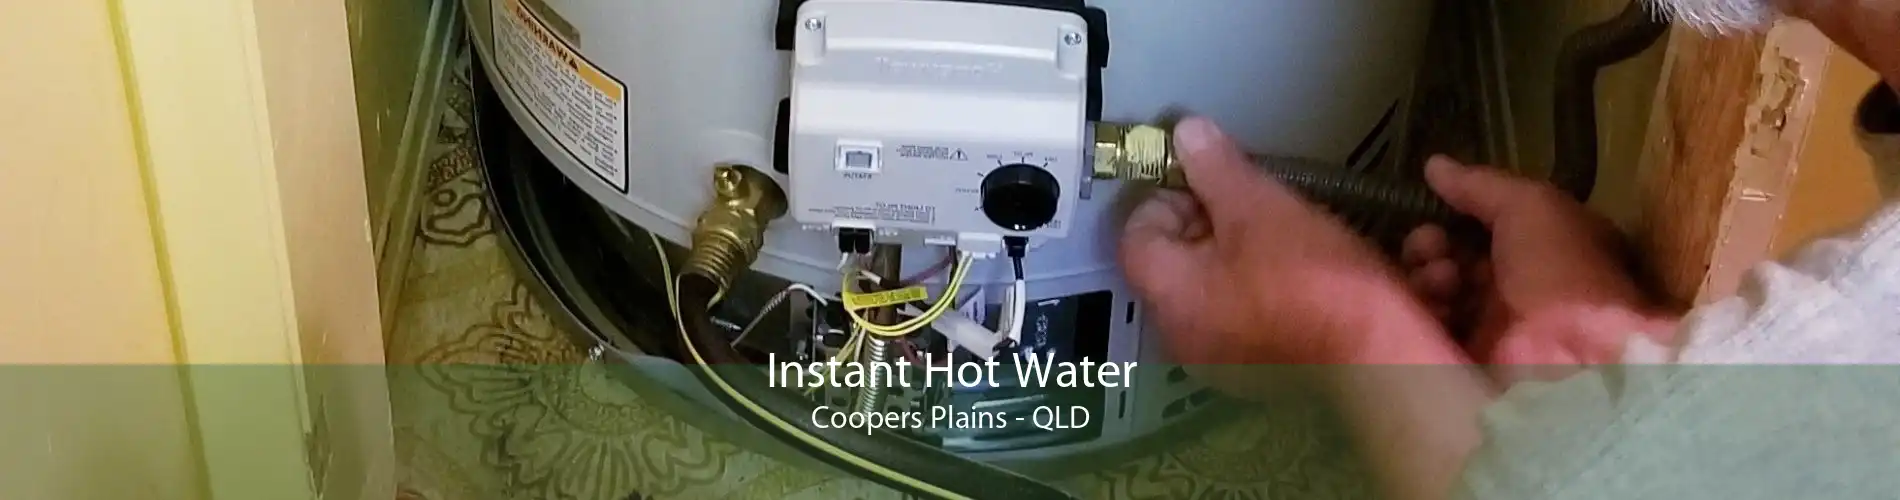 Instant Hot Water Coopers Plains - QLD